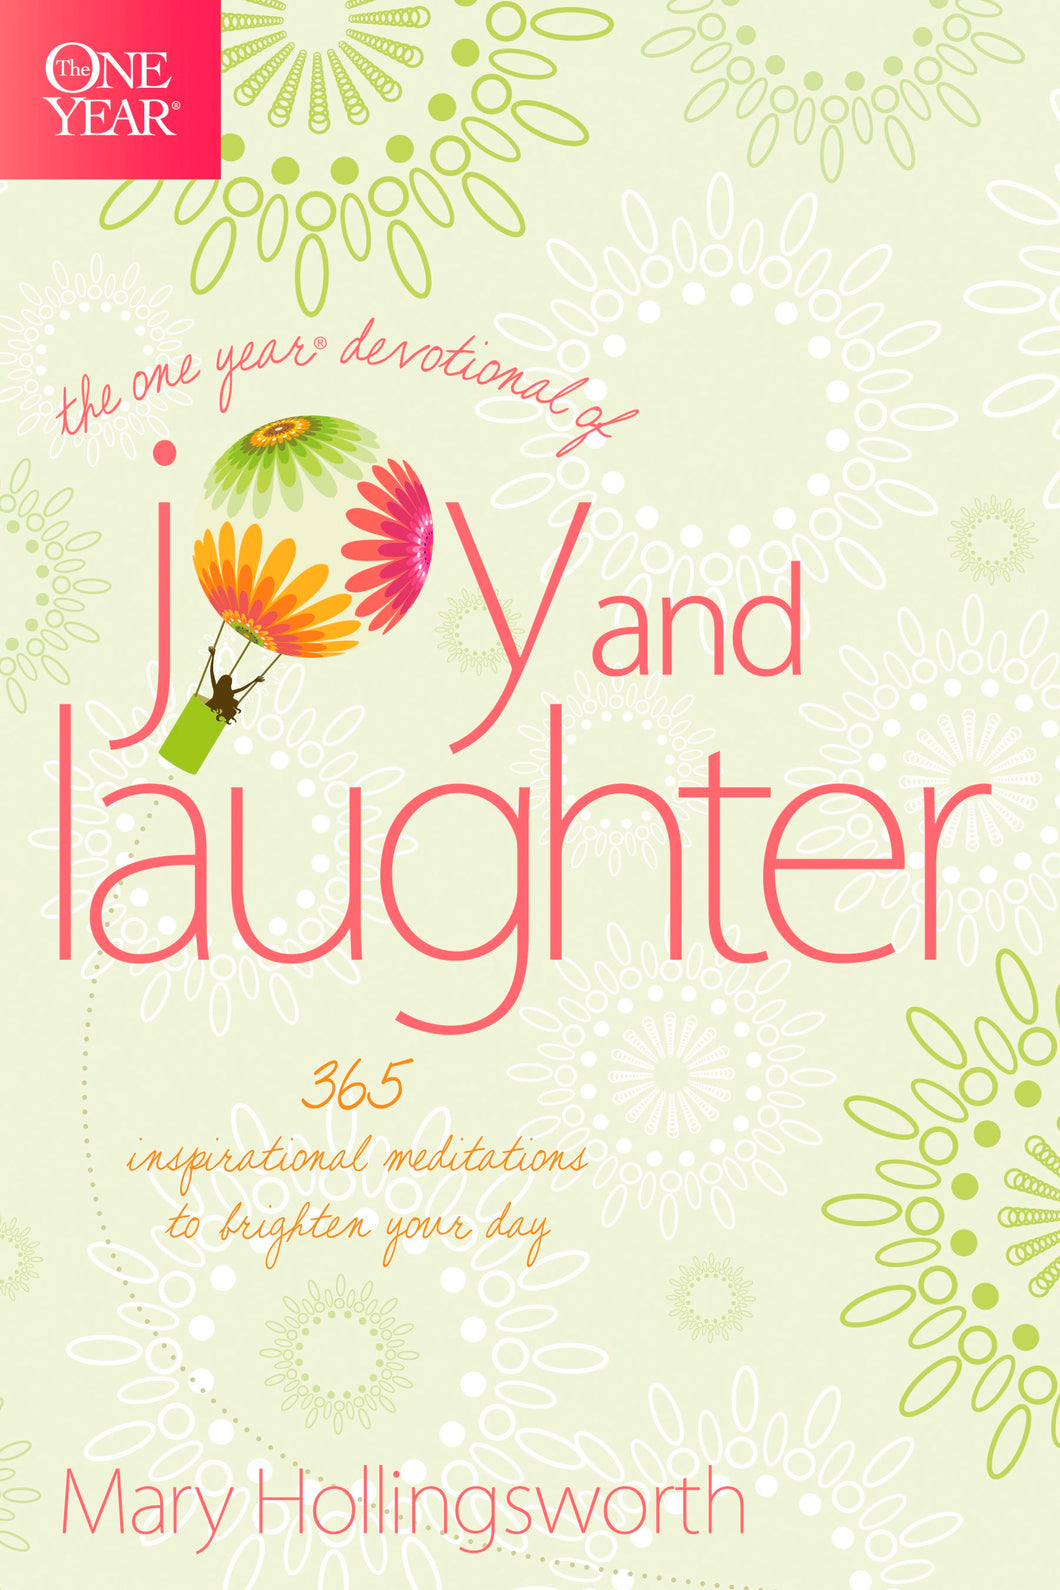 The One Year Devotional Of Joy And Laughter